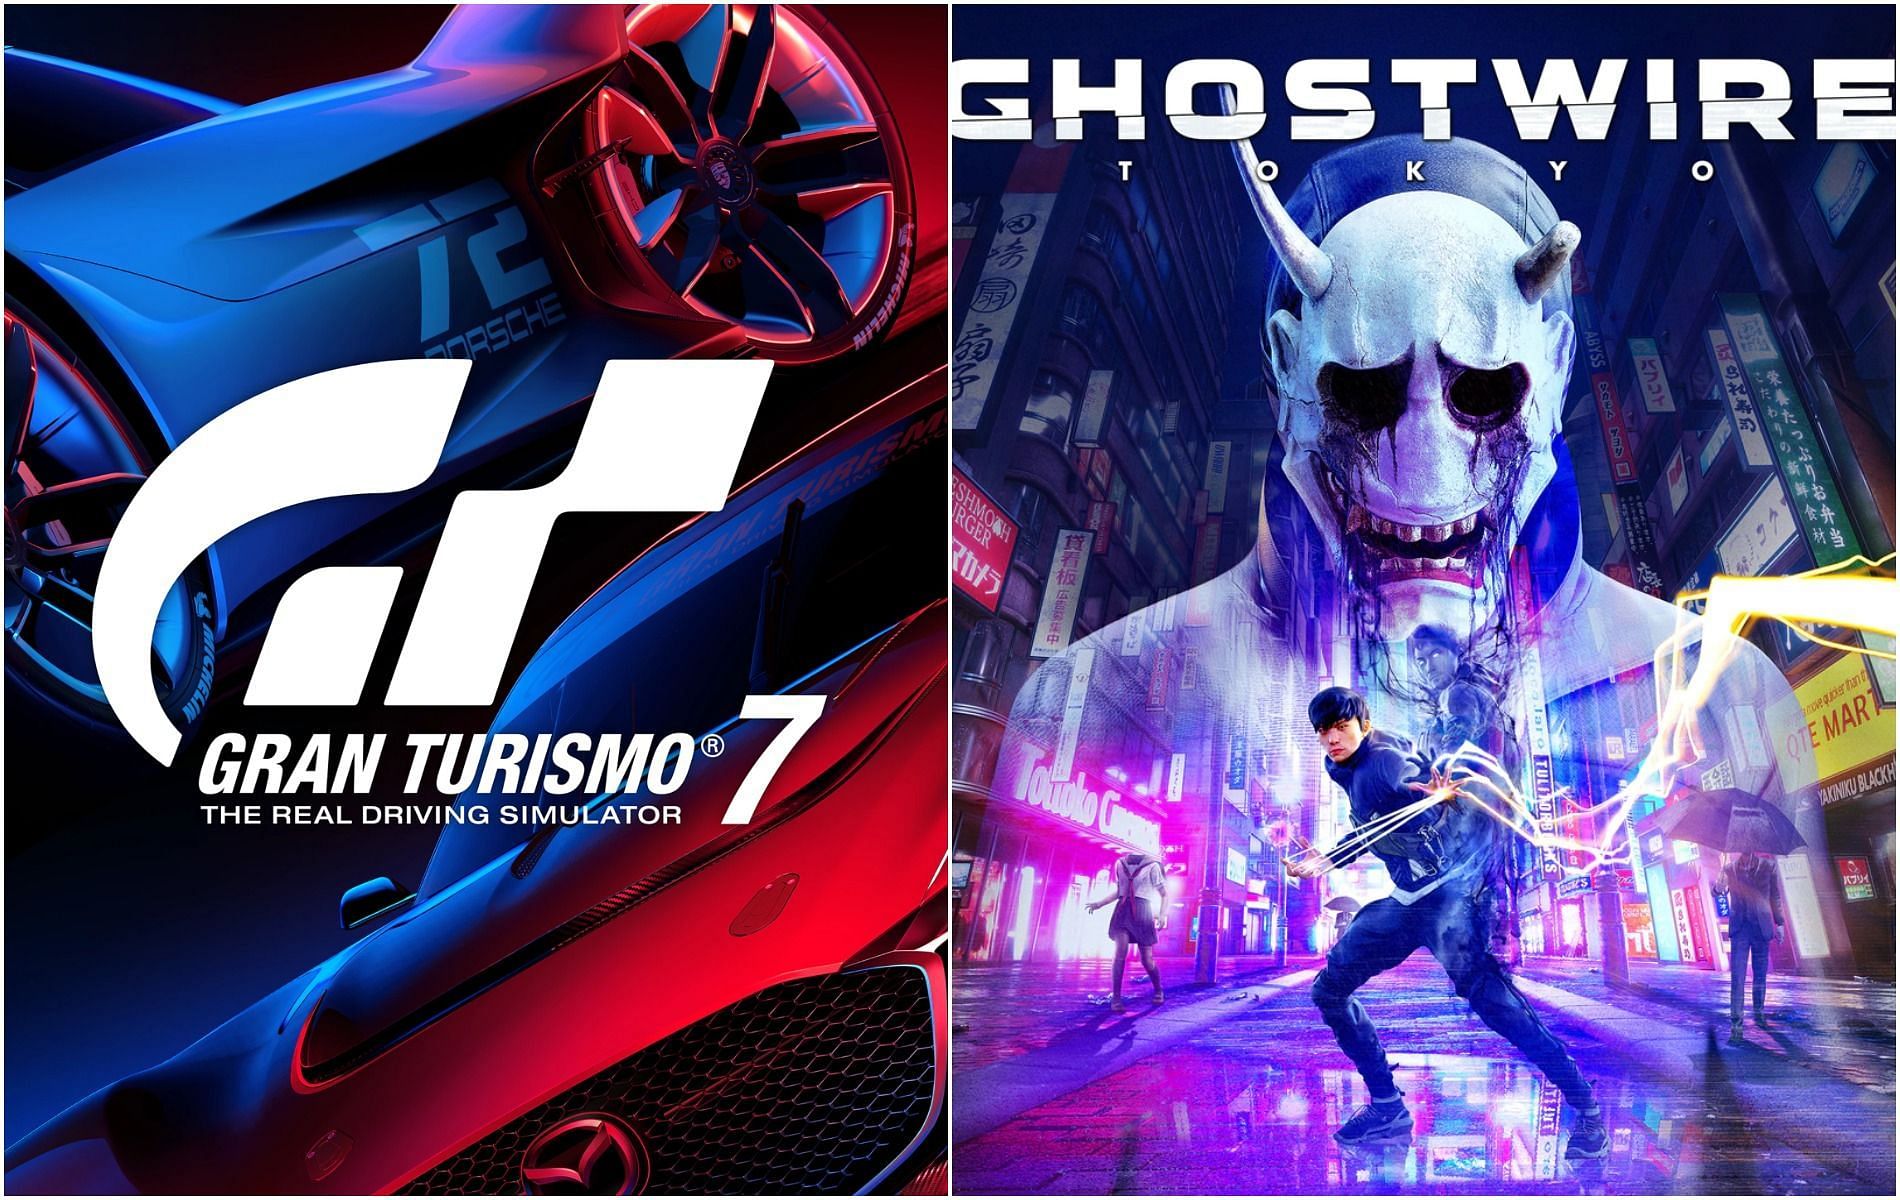 Gran Turismo 7 and Ghostwire Tokyo are coming to PlayStation 4 and 5 (Image by Sony and Bethesda)